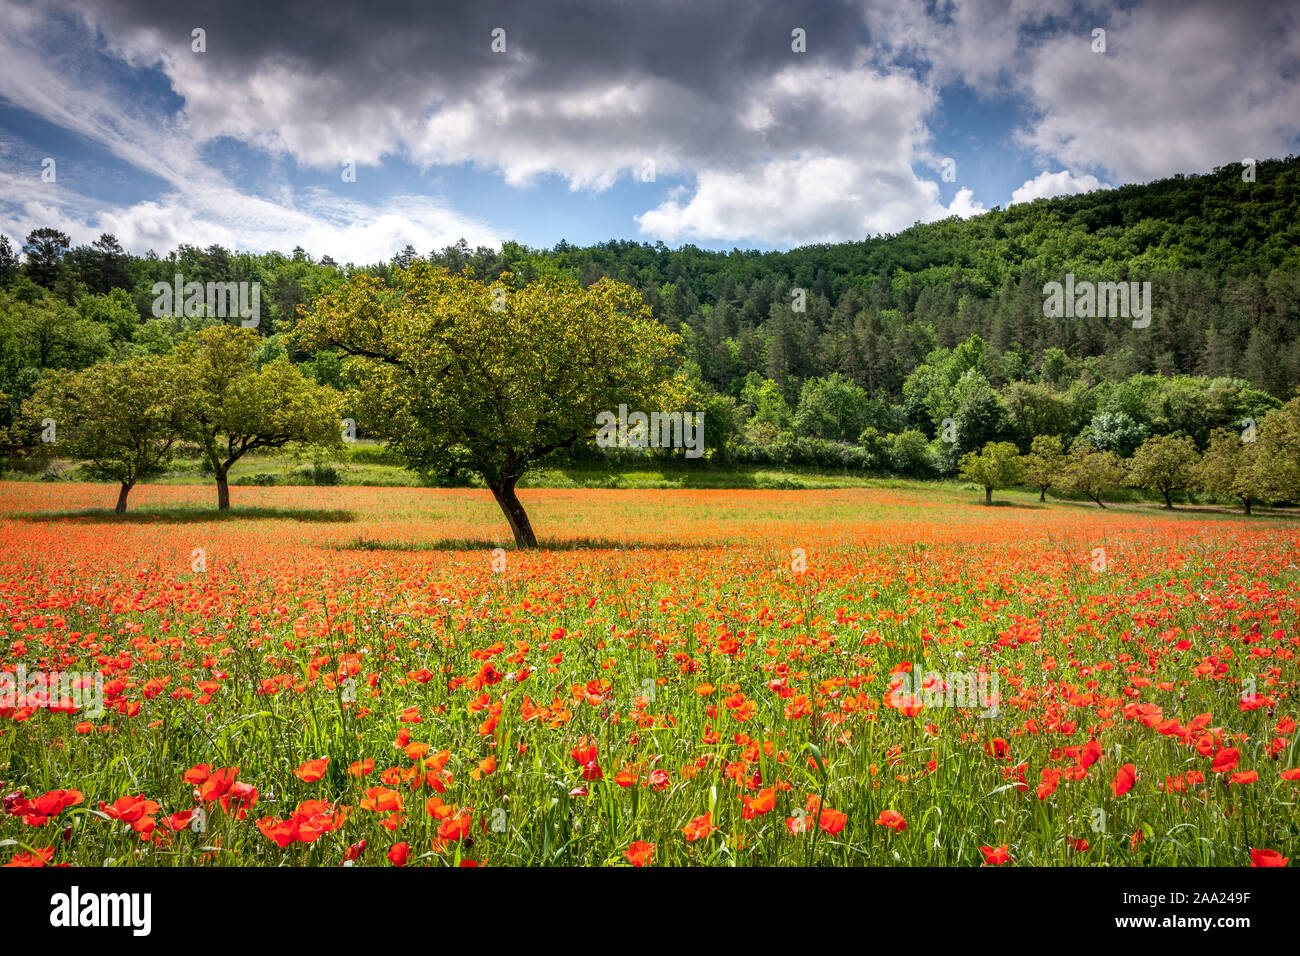 Walnut trees in a field of wild red poppies Stock Photo